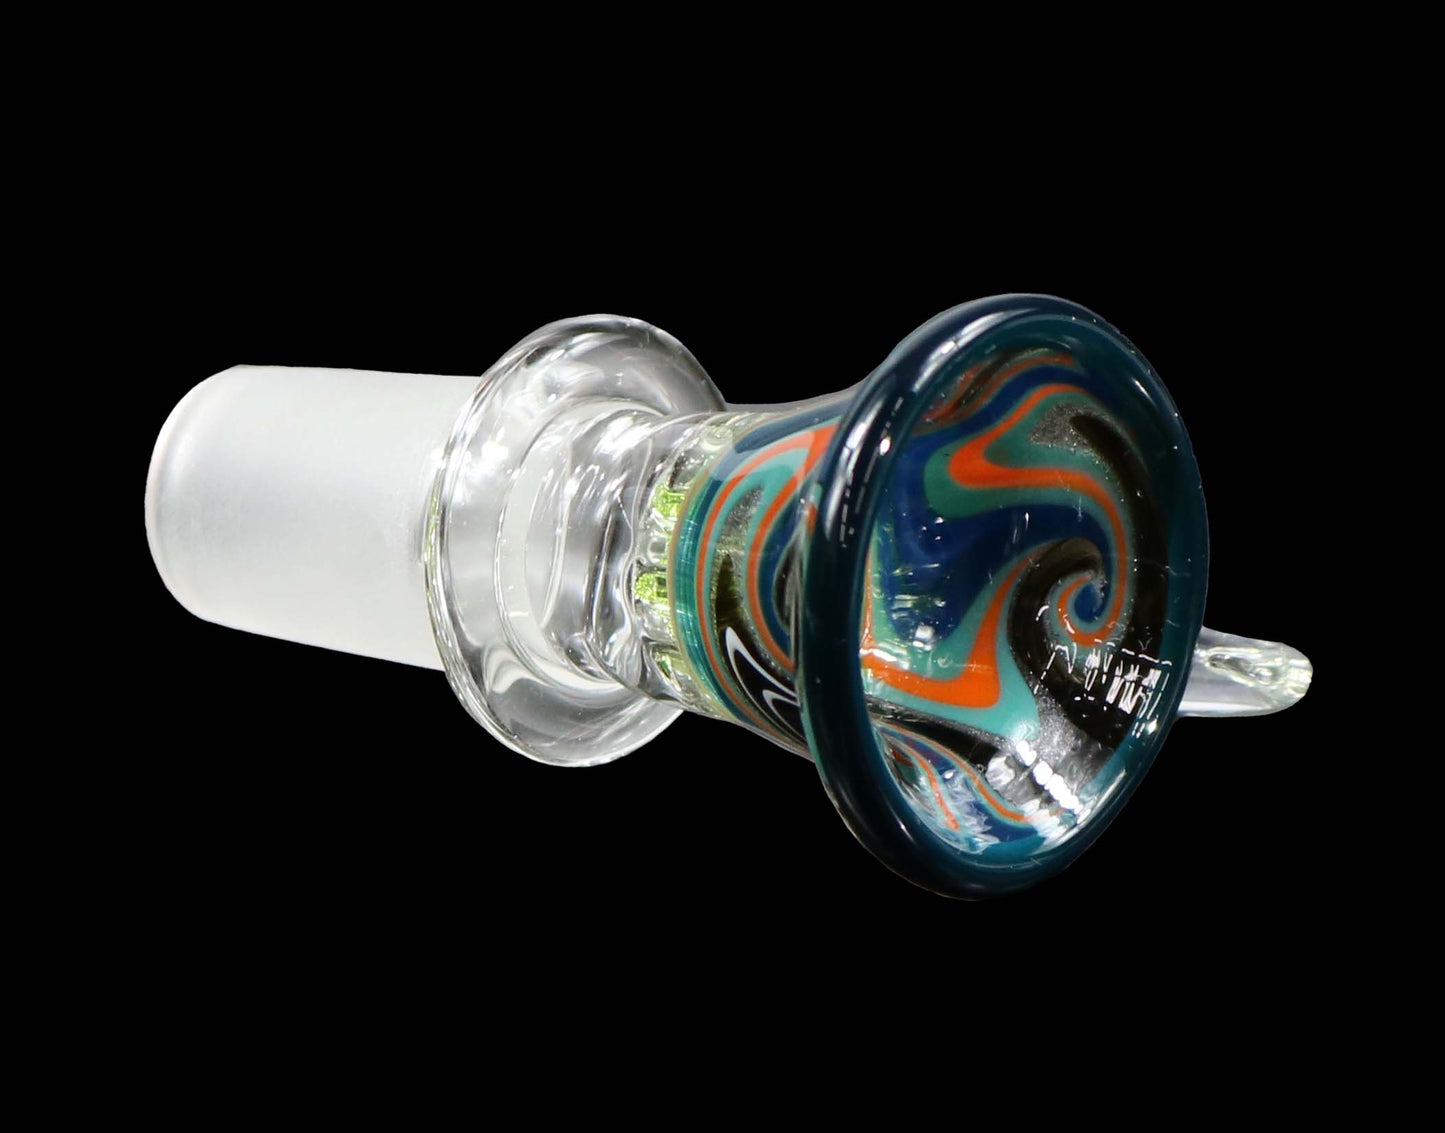 19mm Martini Bong Slide with built in colored screen from Glass by Slick - Teal/Orange/Grey